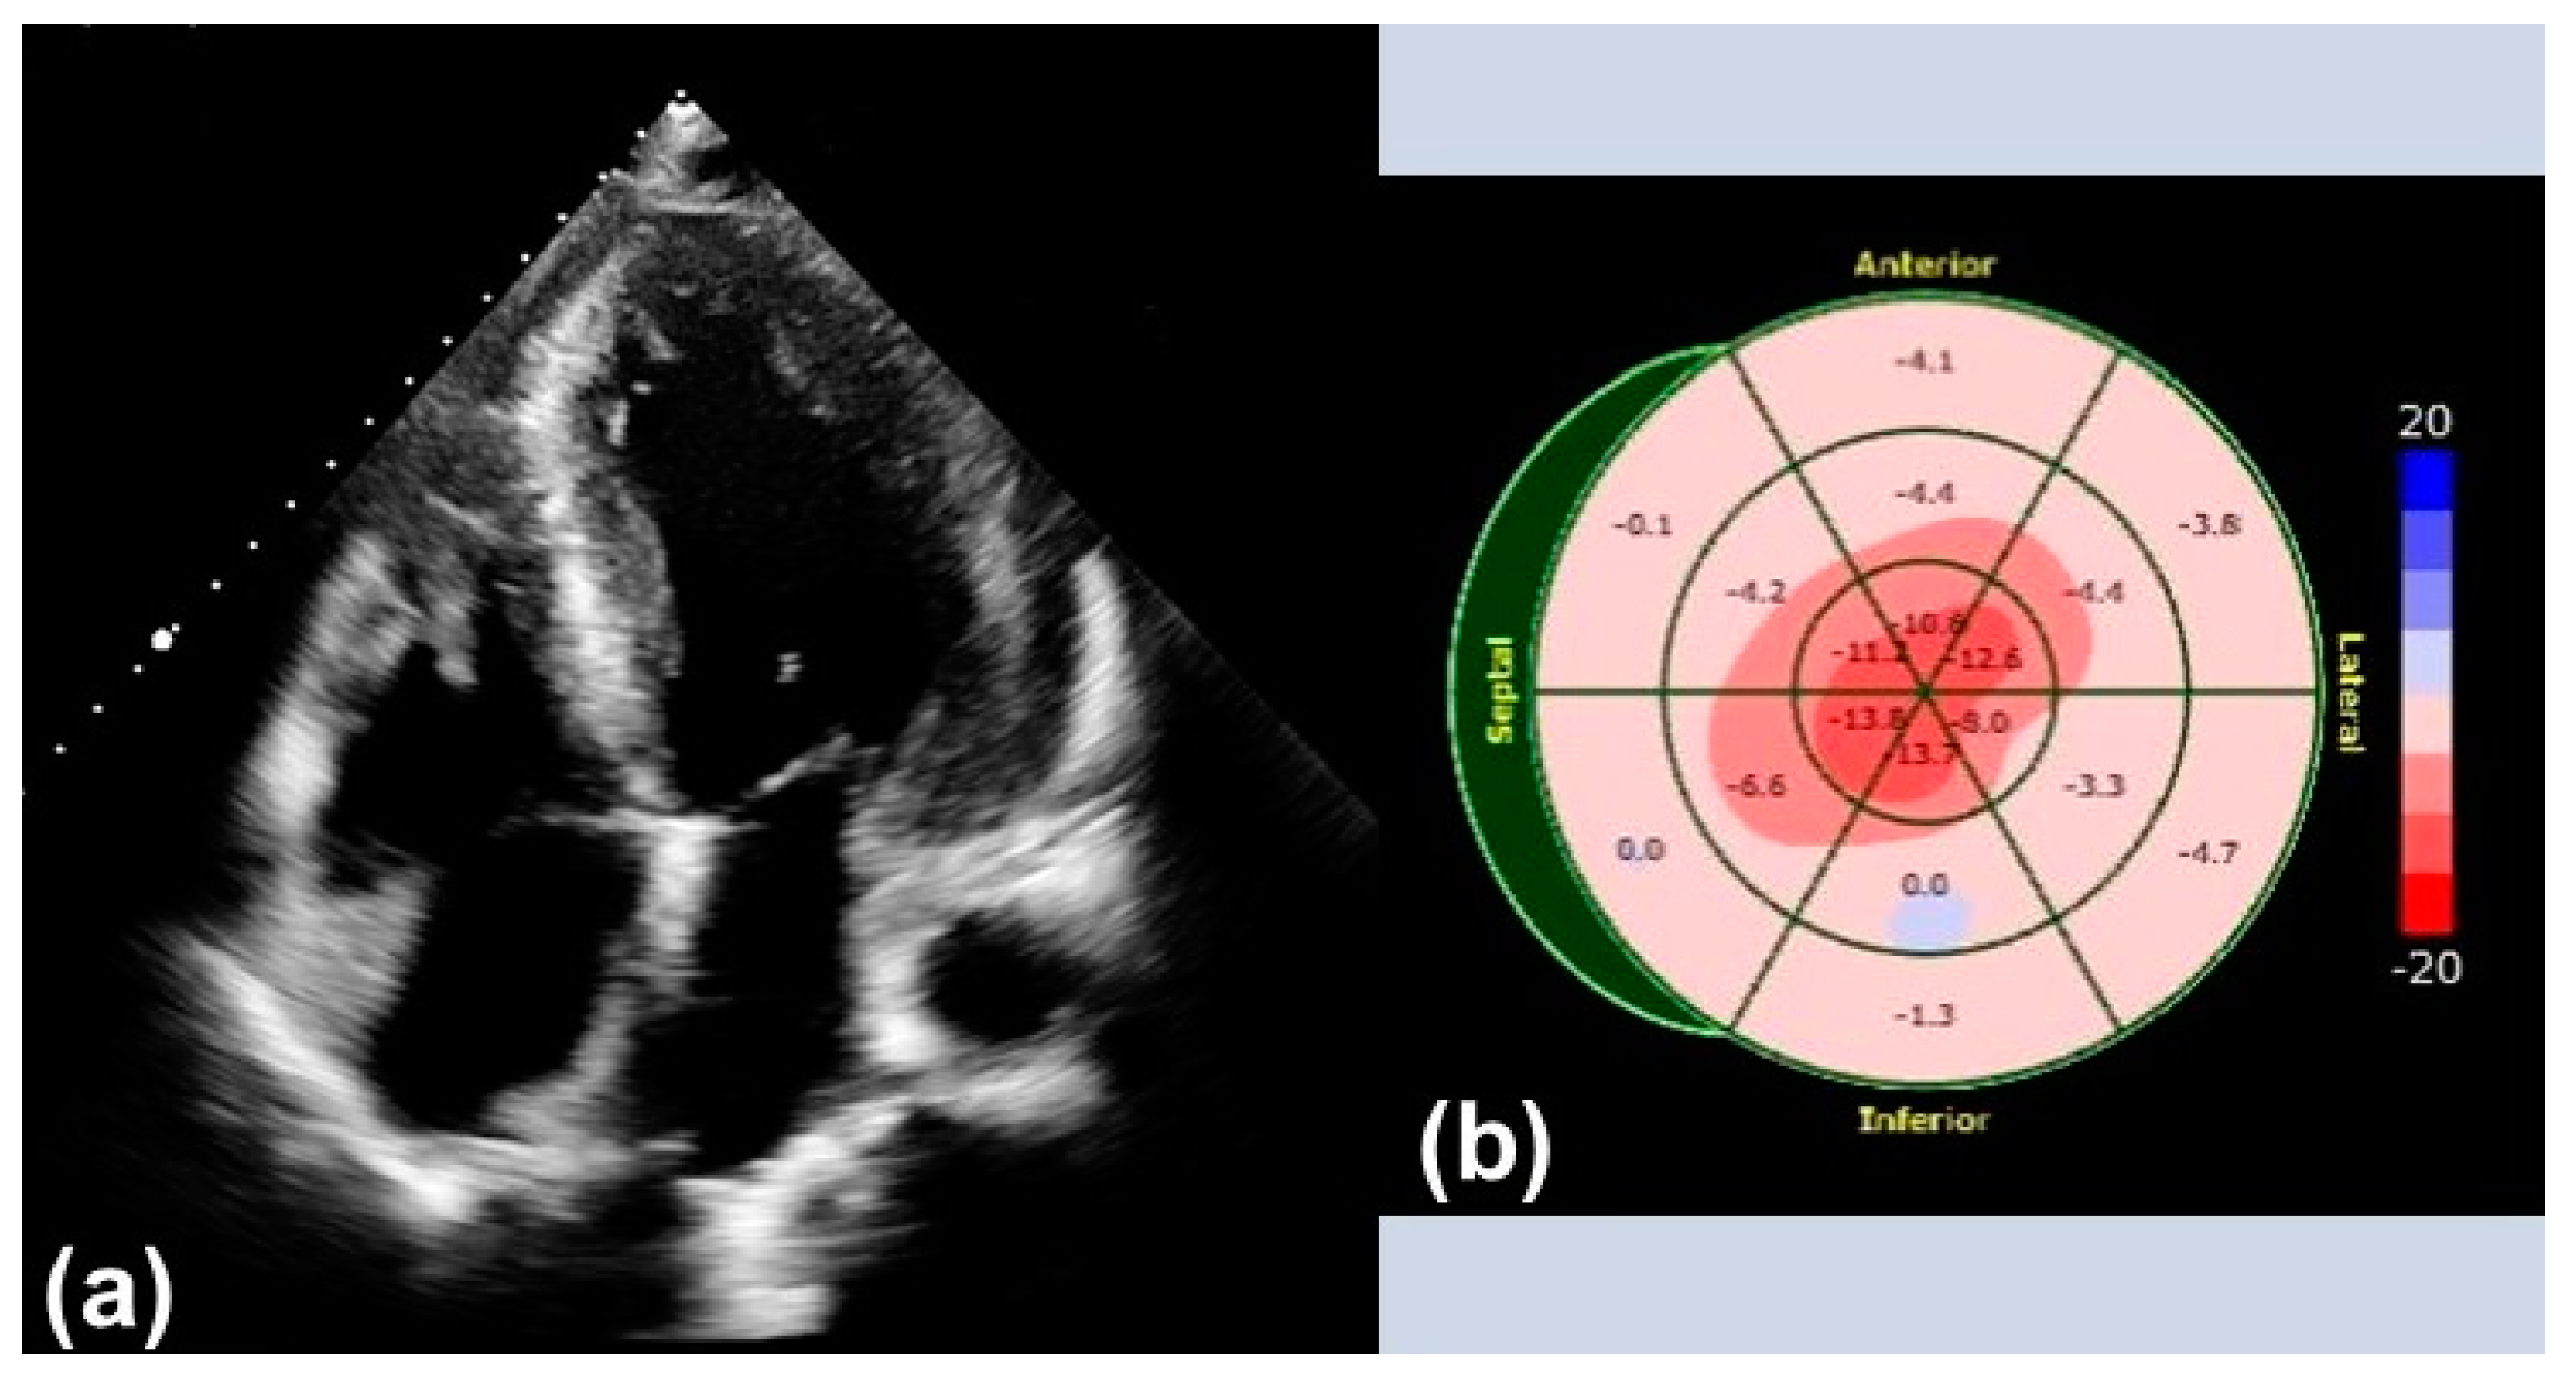 Patterns of CMR measured longitudinal strain and its association with late  gadolinium enhancement in patients with cardiac amyloidosis and its mimics, Journal of Cardiovascular Magnetic Resonance